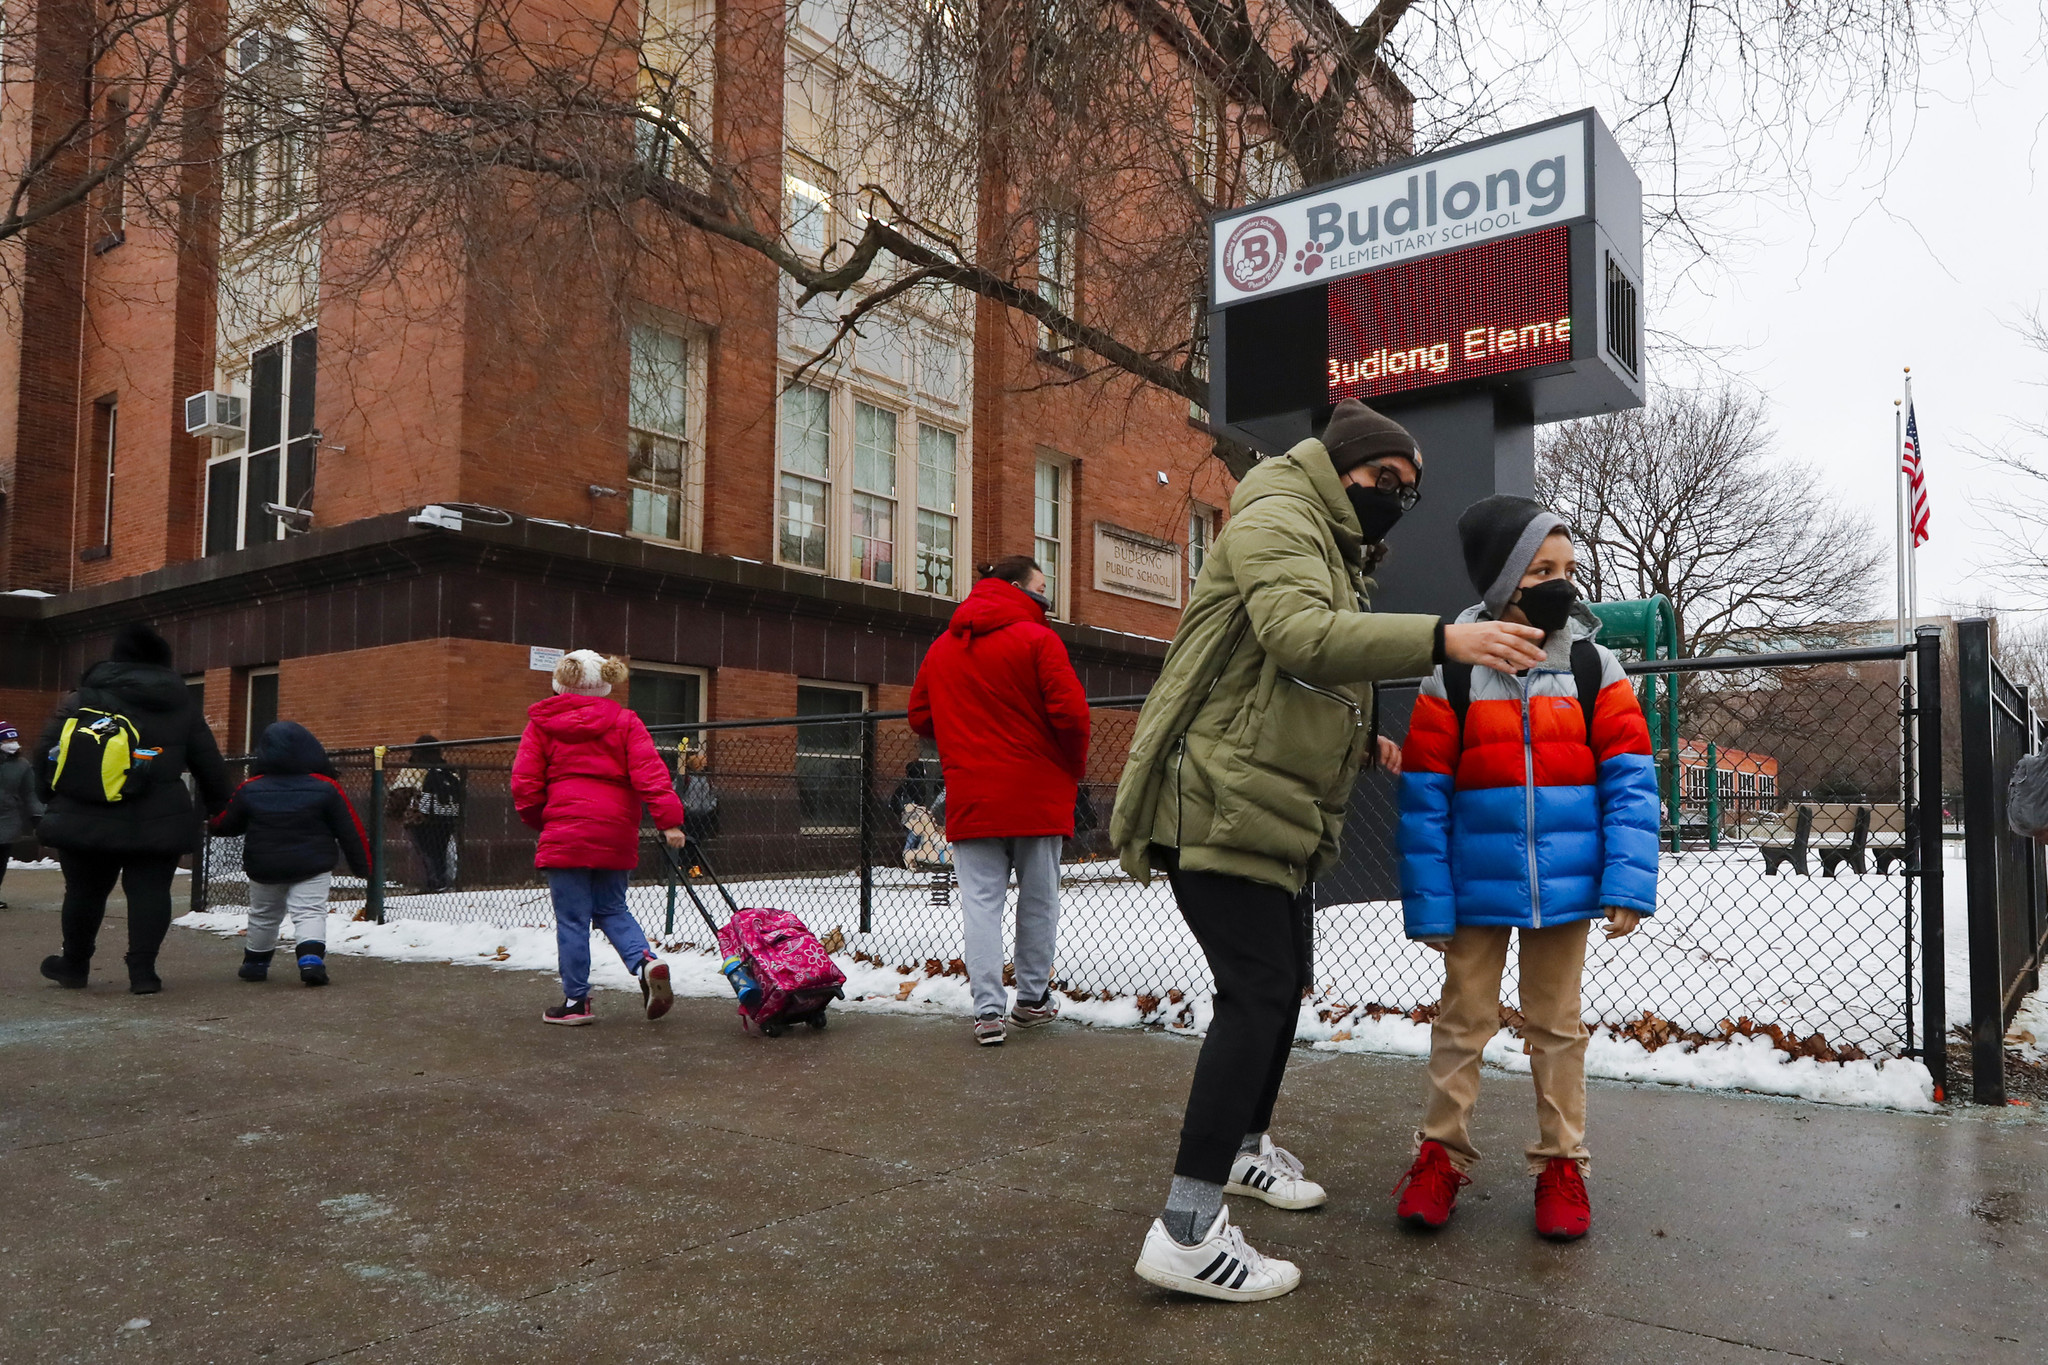 CPS reopening: Here's what the 1st day back was like at one Chicago school  - Chicago Sun-Times